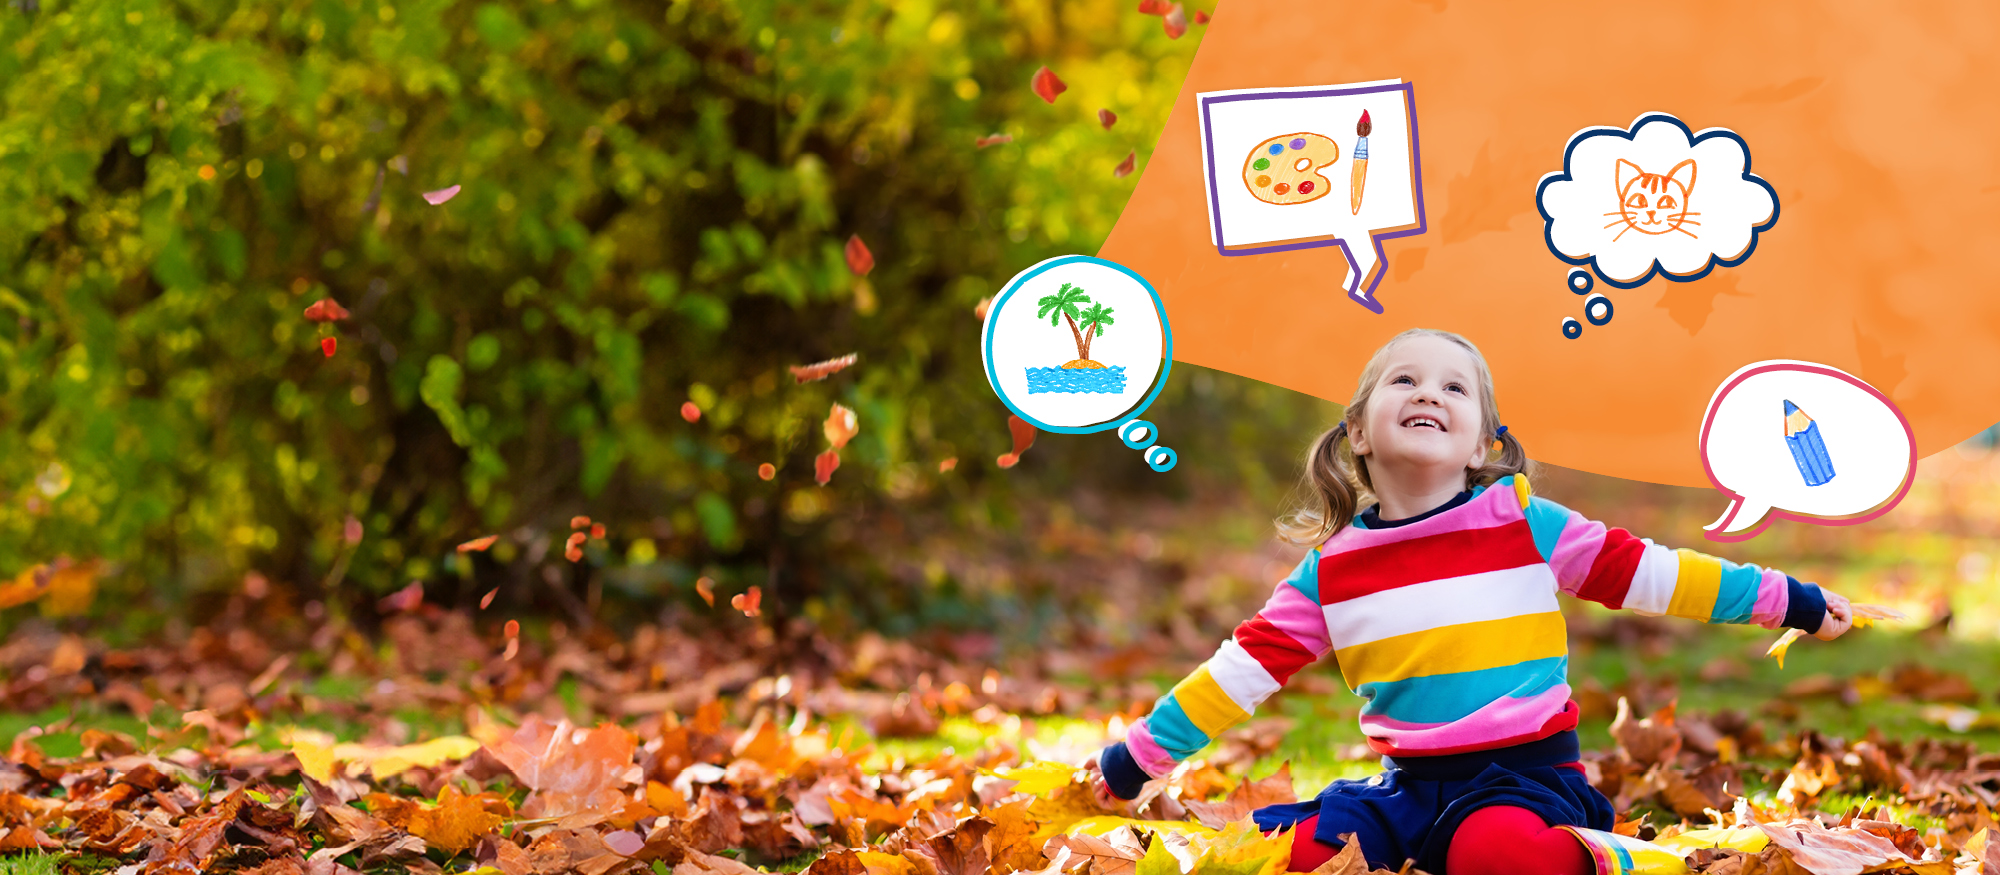 Little girl in autumn leaves thinking in imaginary bubble about art, activities and drawing